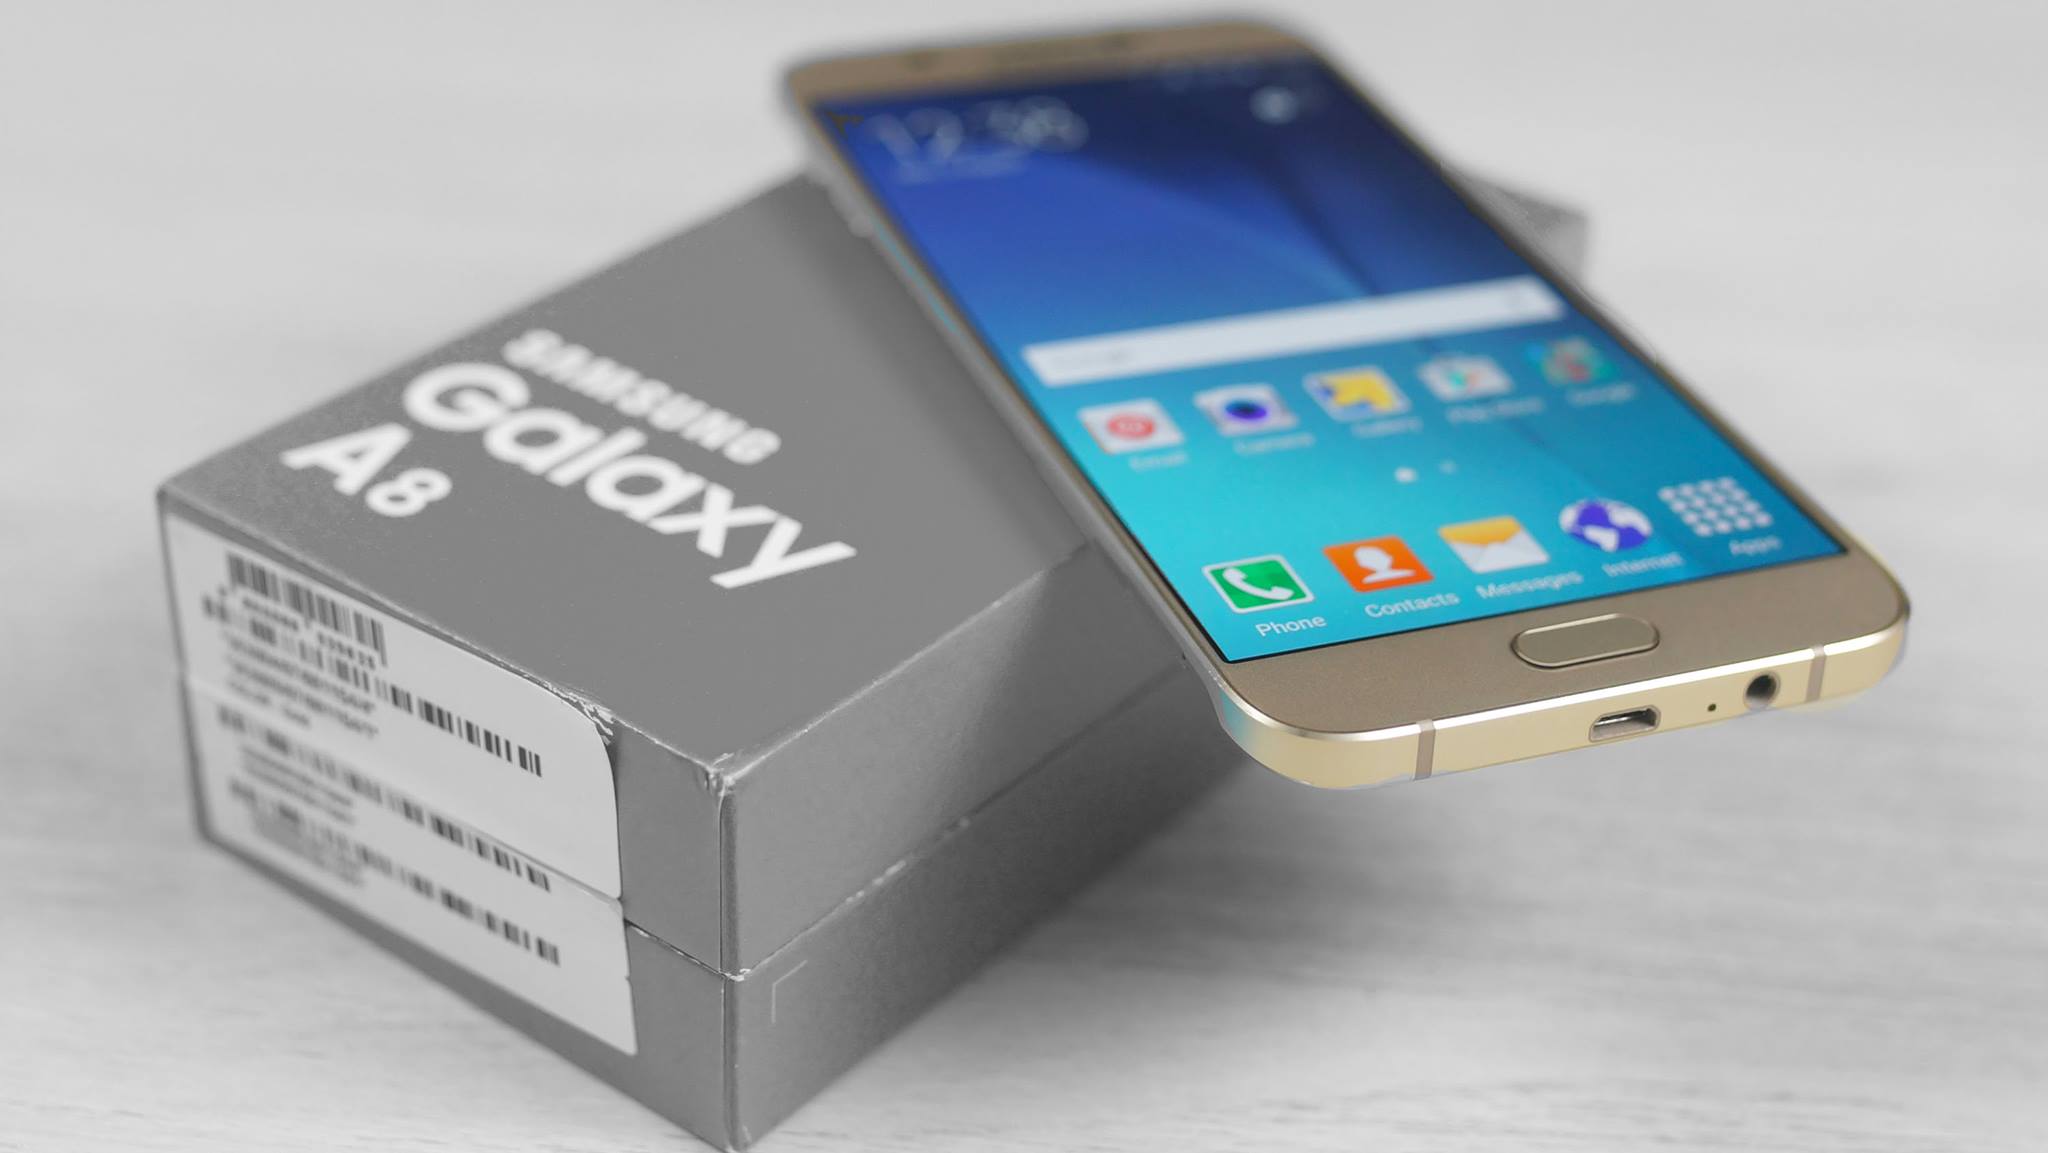 Samsung Galaxy A8 Price in Pakistan | Features and Specification